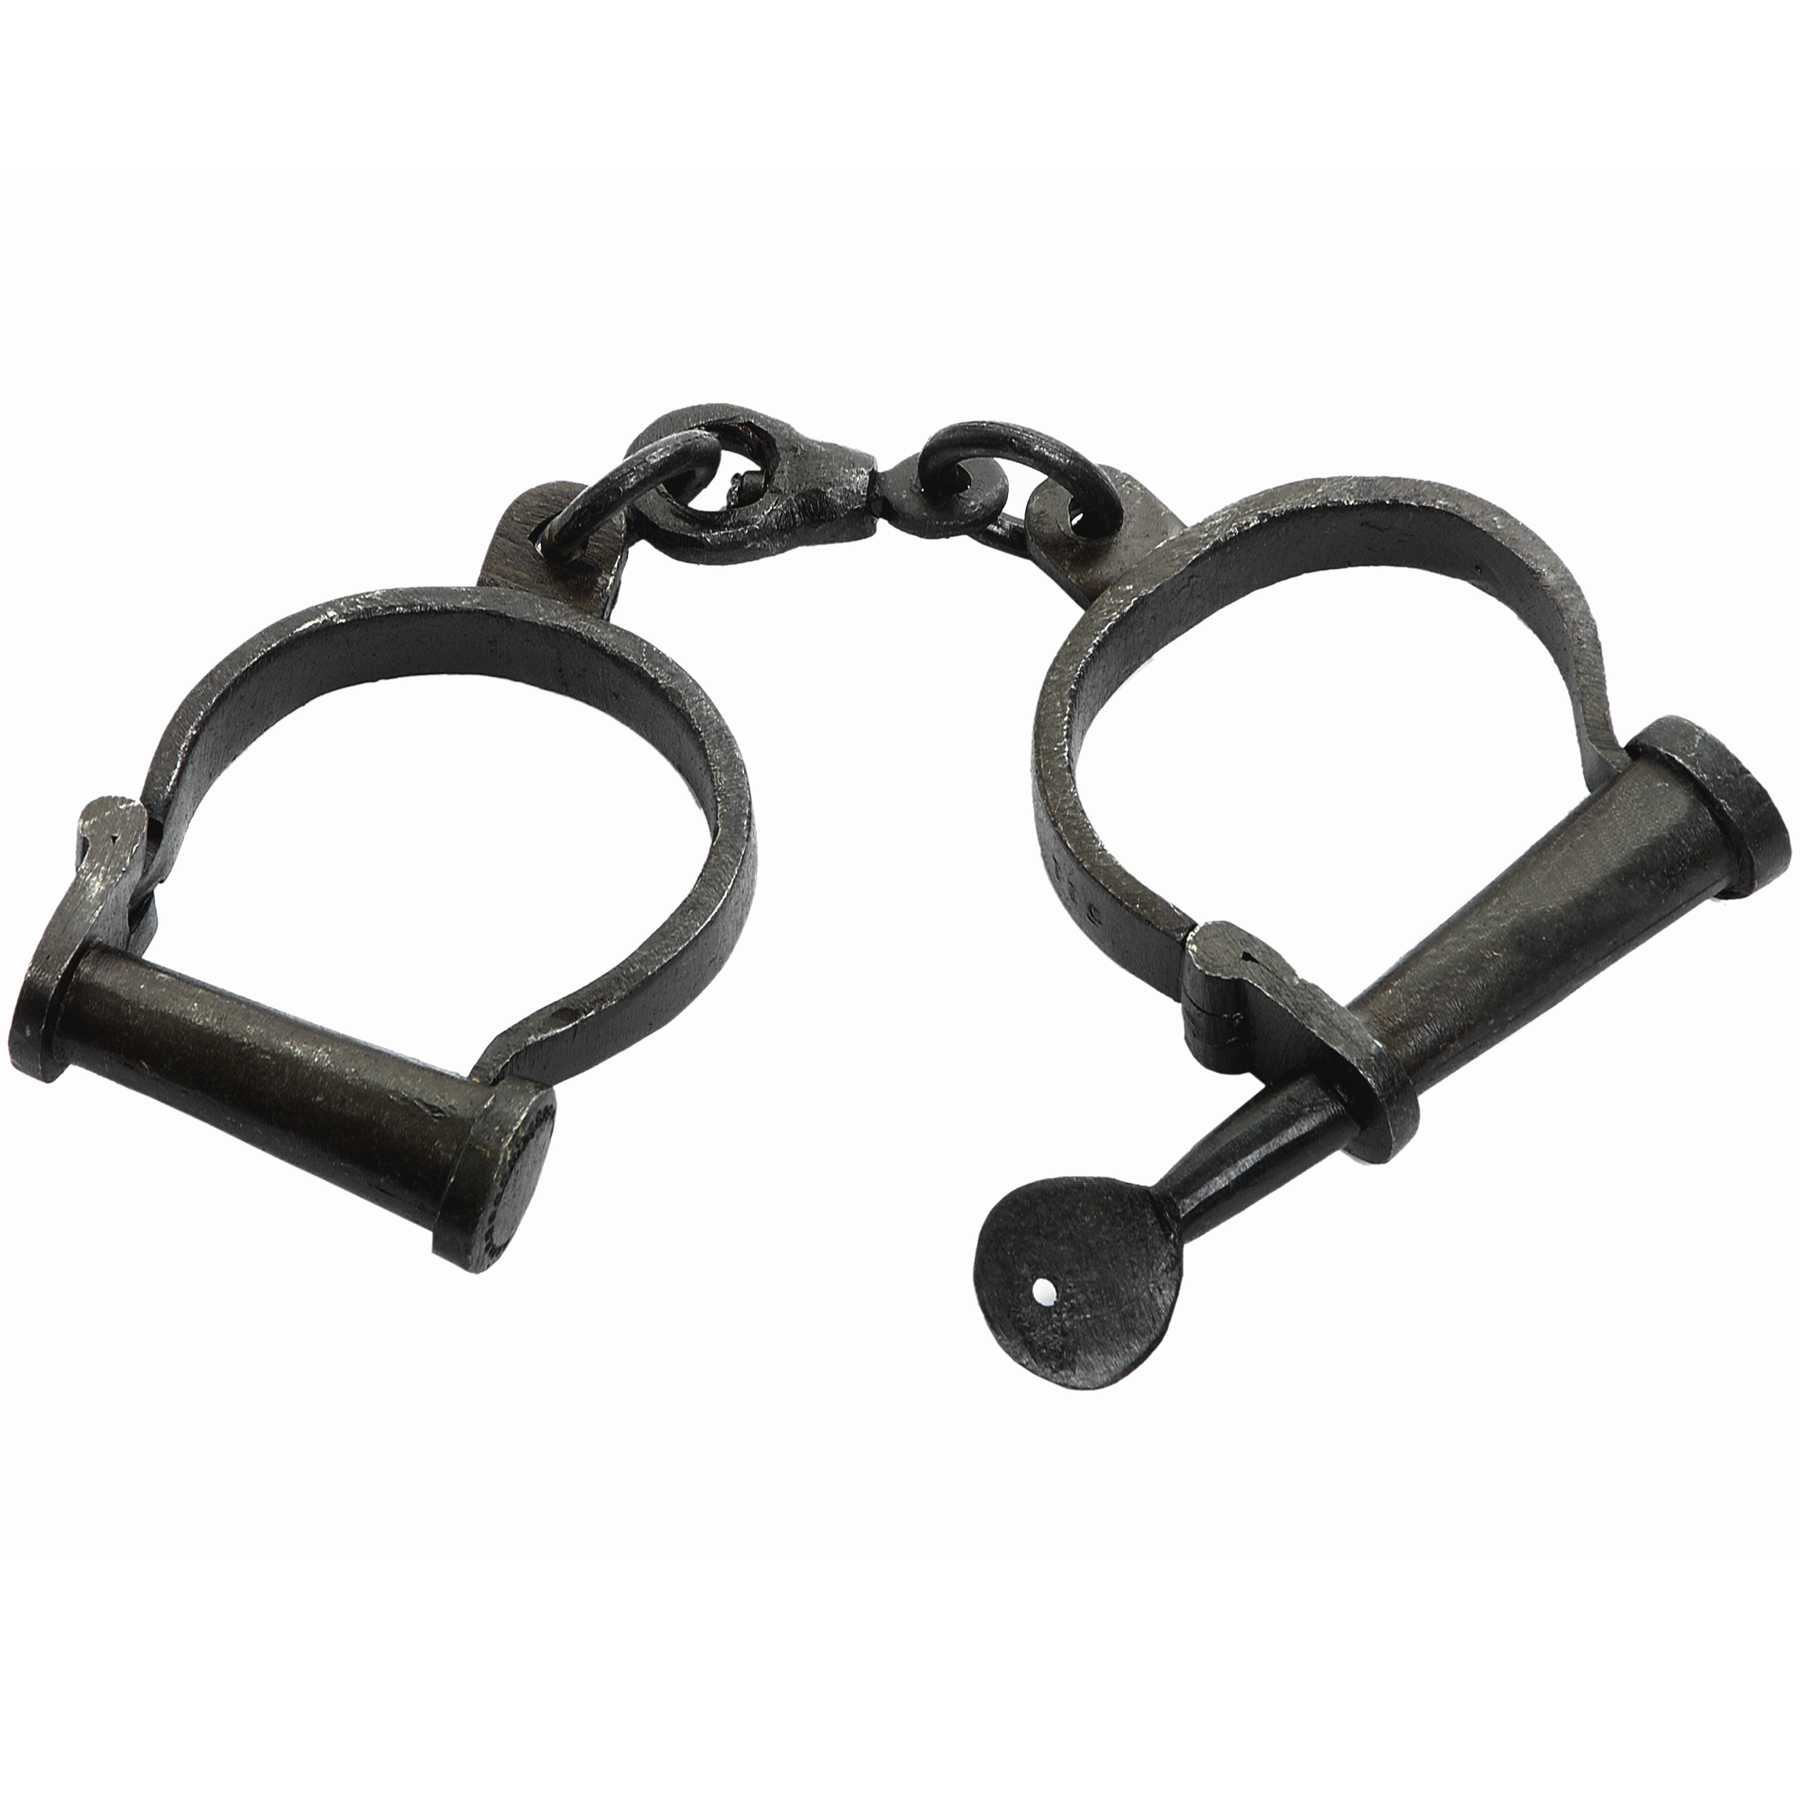 Pair Of Black Handcuffs Adjustable (S994) | Other Swords And ...